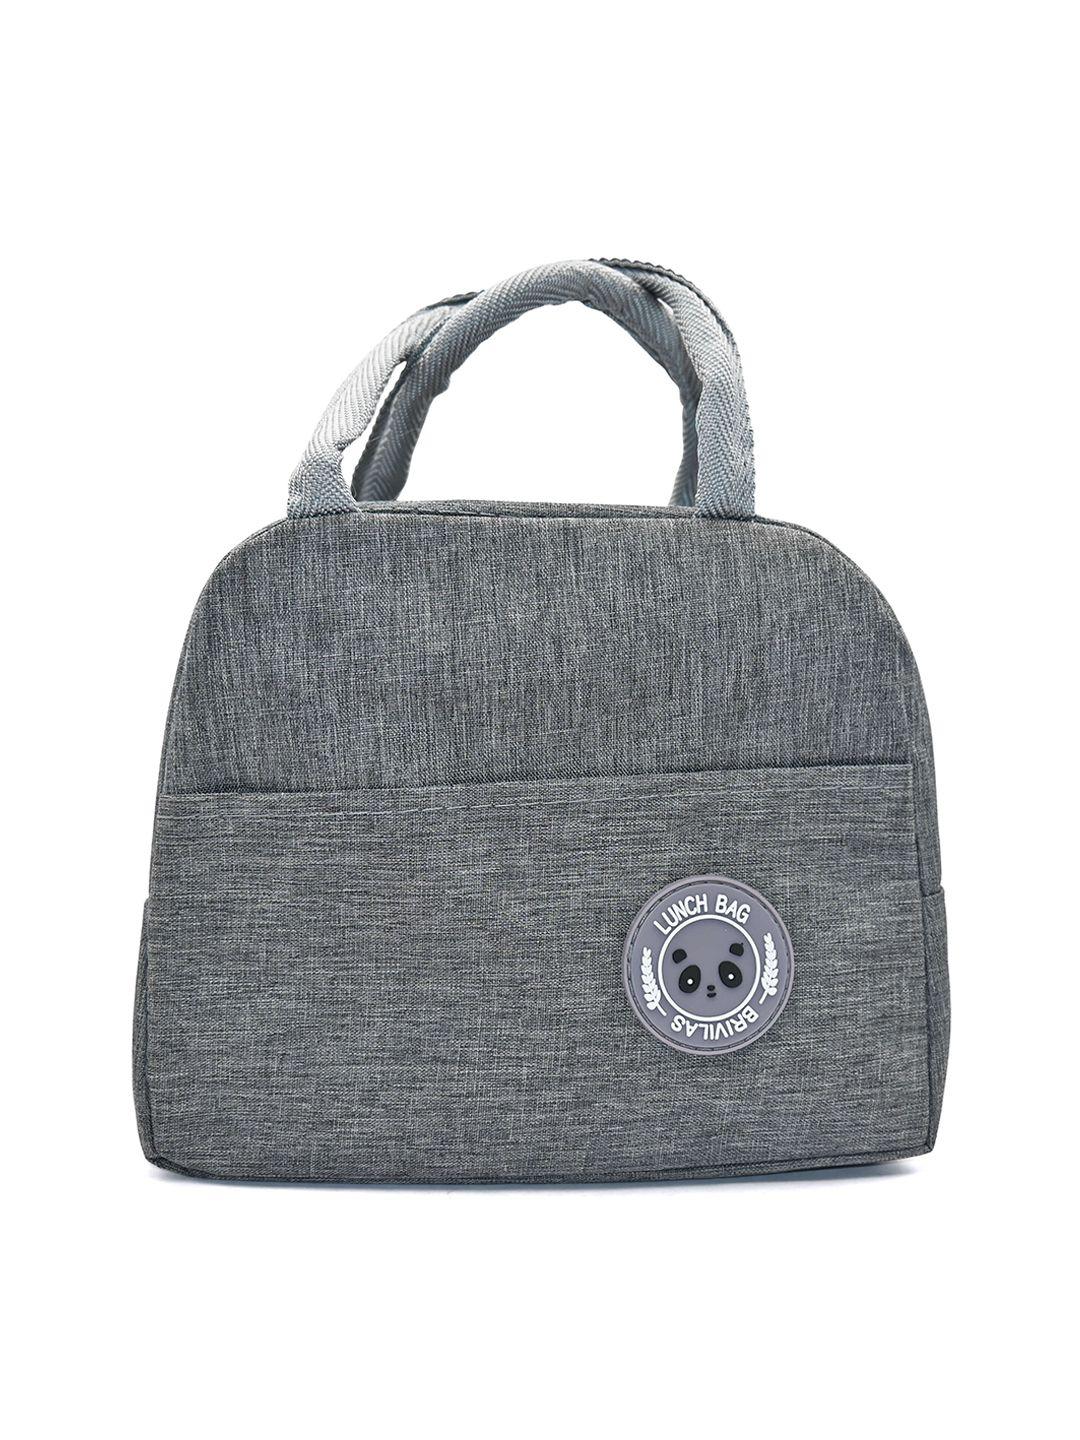 awestuffs textured travel small lunch bag